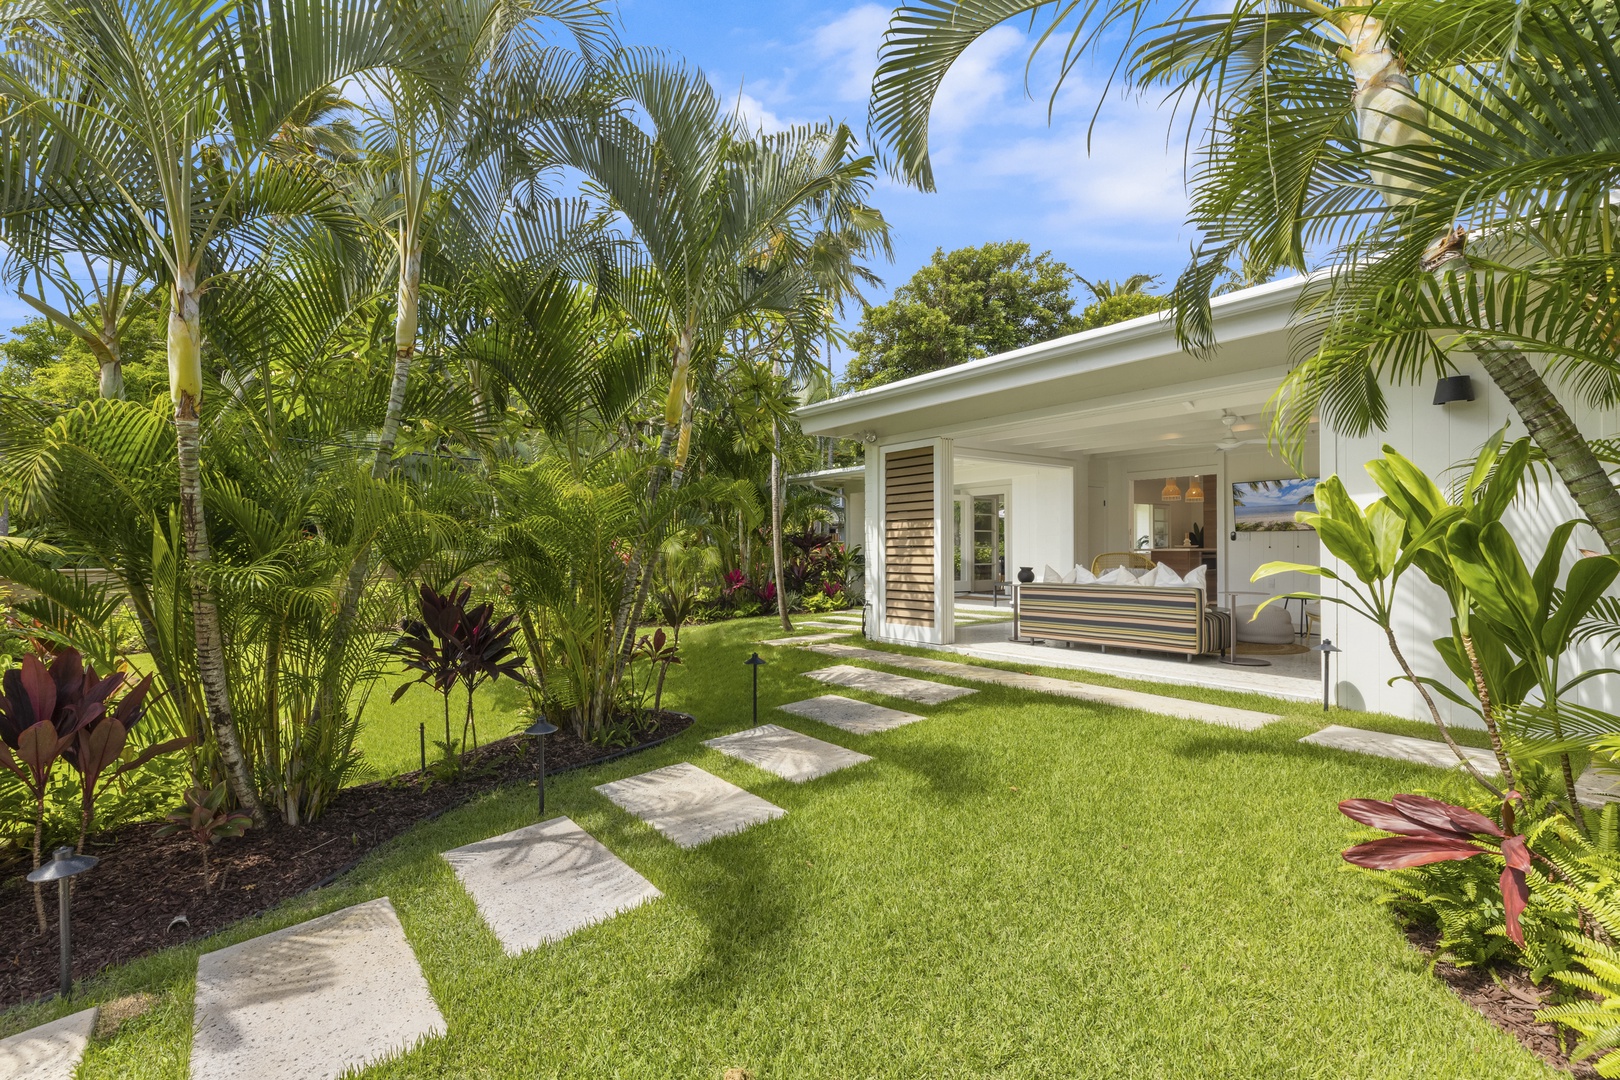 Kailua Vacation Rentals, Lanikai Hideaway - Professional natural landscaping is a tropical dream